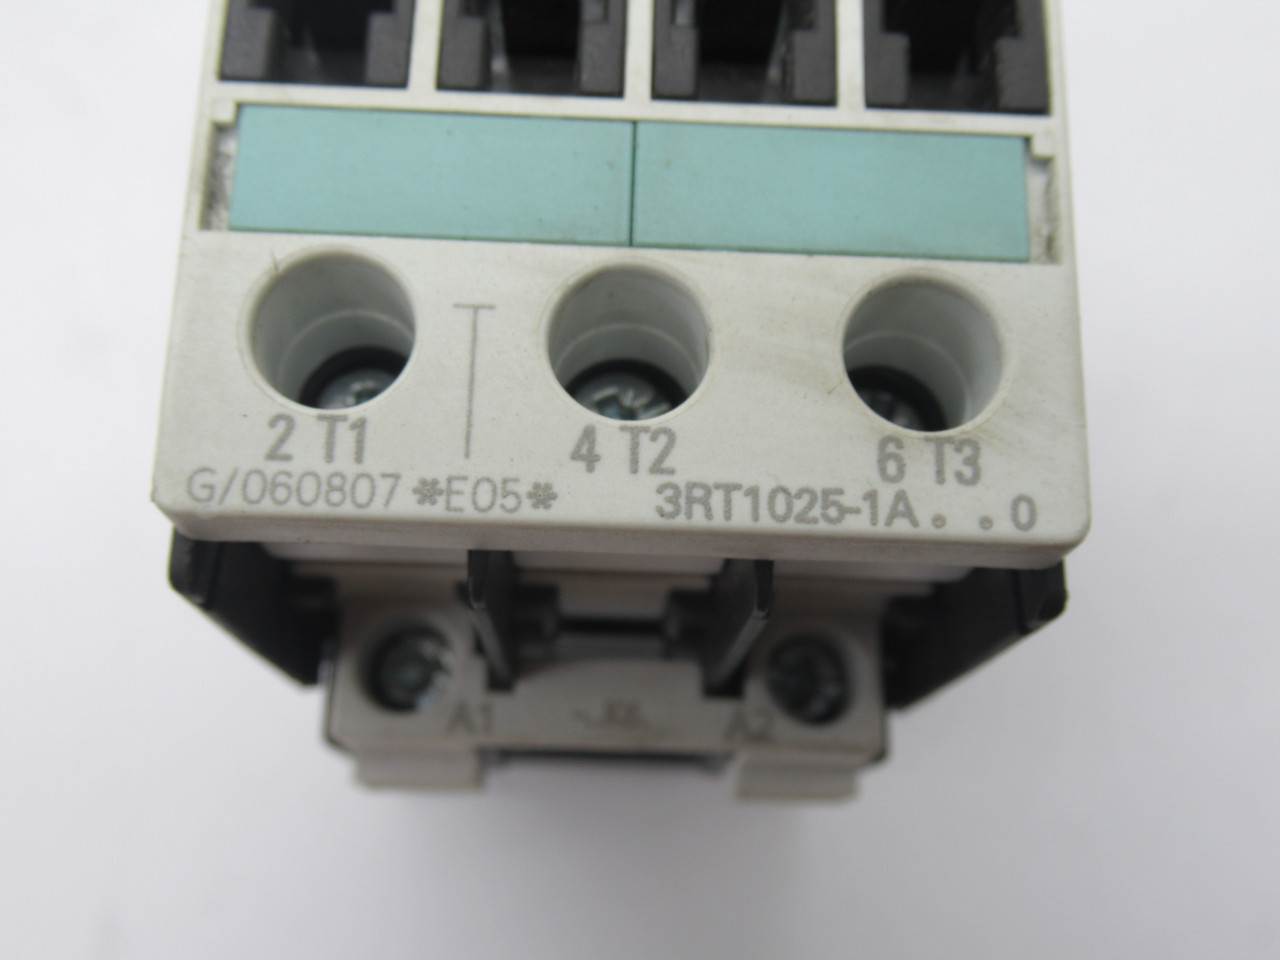 Siemens 3RT1025-1AK60 Contactor 110/120V 50/60Hz USED